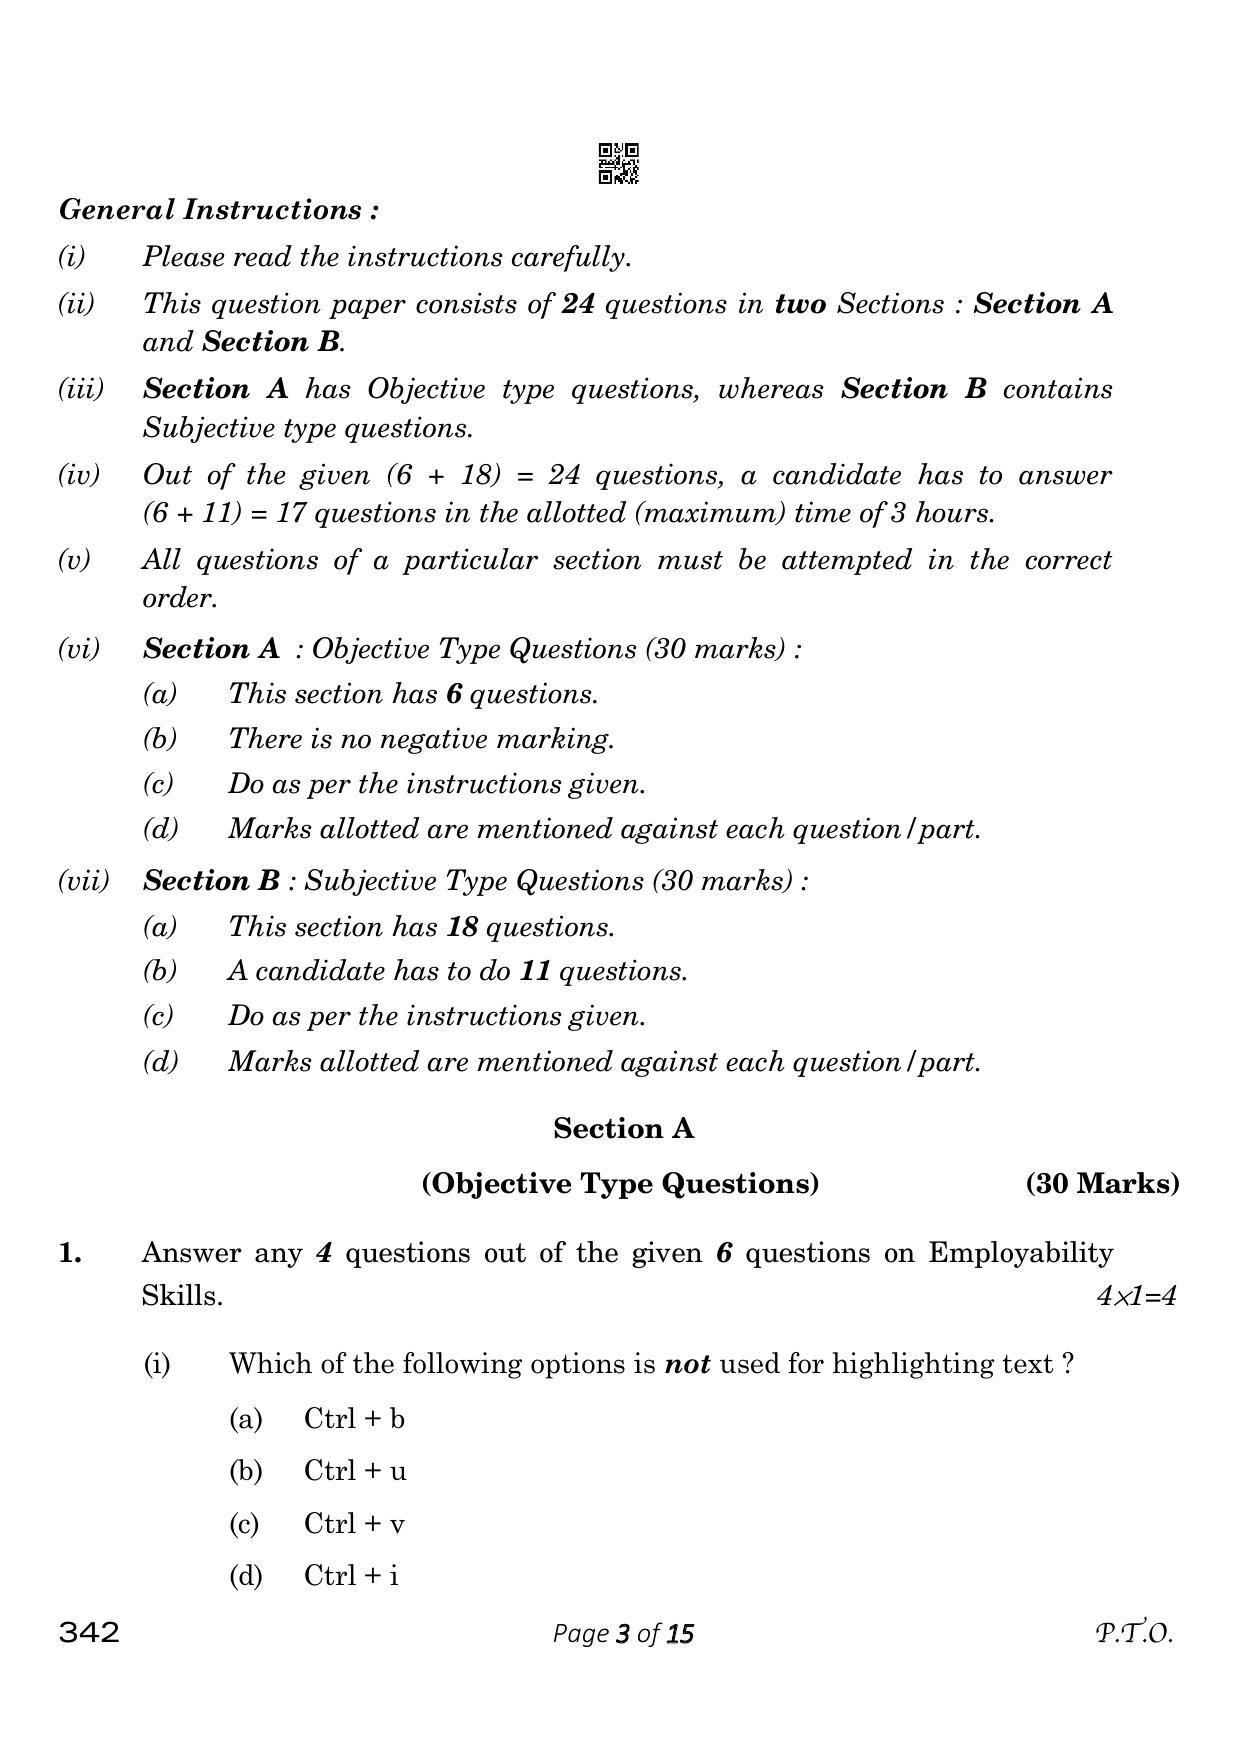 CBSE Class 12 342_Geospatial Technology 2023 Question Paper - Page 3